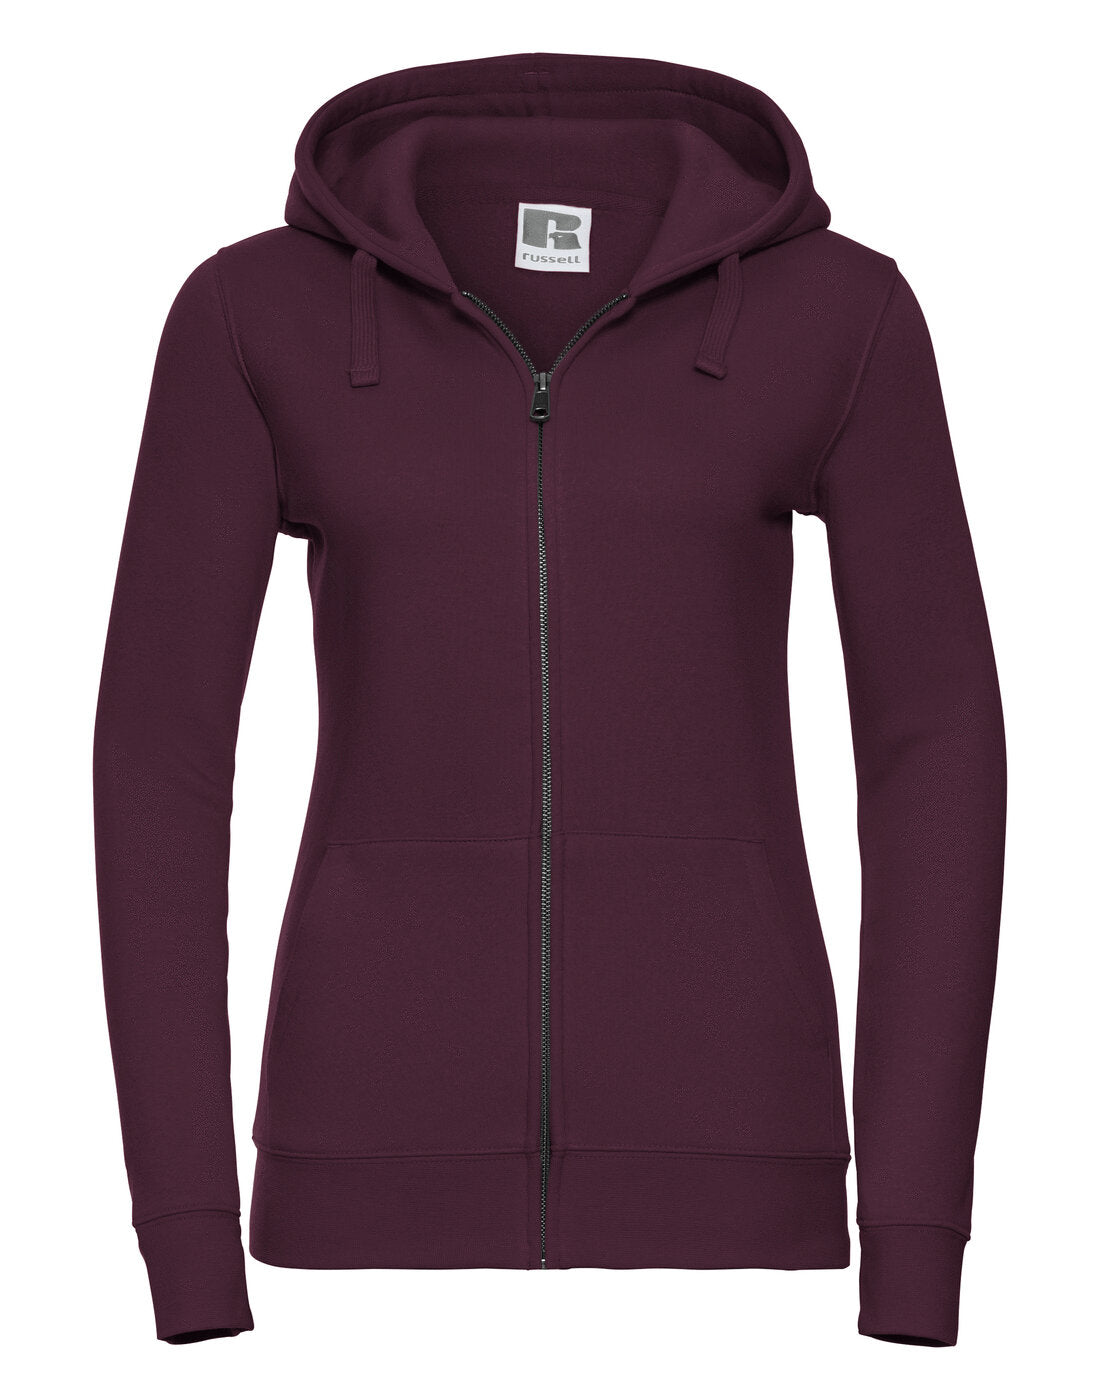 Russell Ladies Authentic Zipped Hood Burgundy